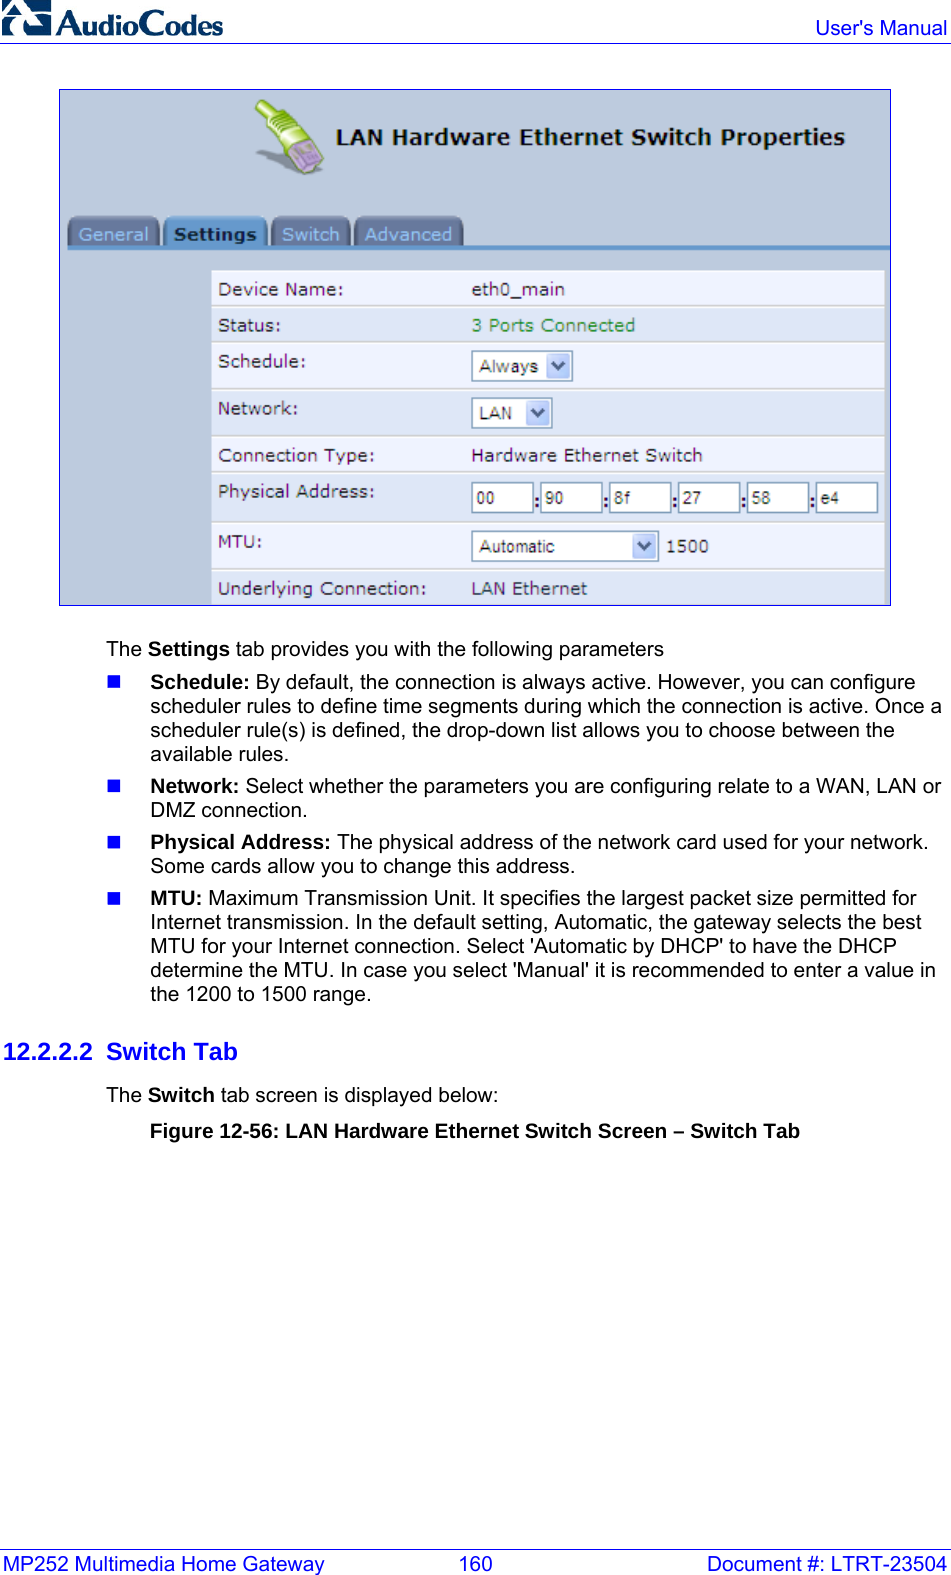 MP252 Multimedia Home Gateway  160  Document #: LTRT-23504  User&apos;s Manual   The Settings tab provides you with the following parameters  Schedule: By default, the connection is always active. However, you can configure scheduler rules to define time segments during which the connection is active. Once a scheduler rule(s) is defined, the drop-down list allows you to choose between the available rules.  Network: Select whether the parameters you are configuring relate to a WAN, LAN or DMZ connection.   Physical Address: The physical address of the network card used for your network. Some cards allow you to change this address.  MTU: Maximum Transmission Unit. It specifies the largest packet size permitted for Internet transmission. In the default setting, Automatic, the gateway selects the best MTU for your Internet connection. Select &apos;Automatic by DHCP&apos; to have the DHCP determine the MTU. In case you select &apos;Manual&apos; it is recommended to enter a value in the 1200 to 1500 range. 12.2.2.2 Switch Tab The Switch tab screen is displayed below: Figure 12-56: LAN Hardware Ethernet Switch Screen – Switch Tab 